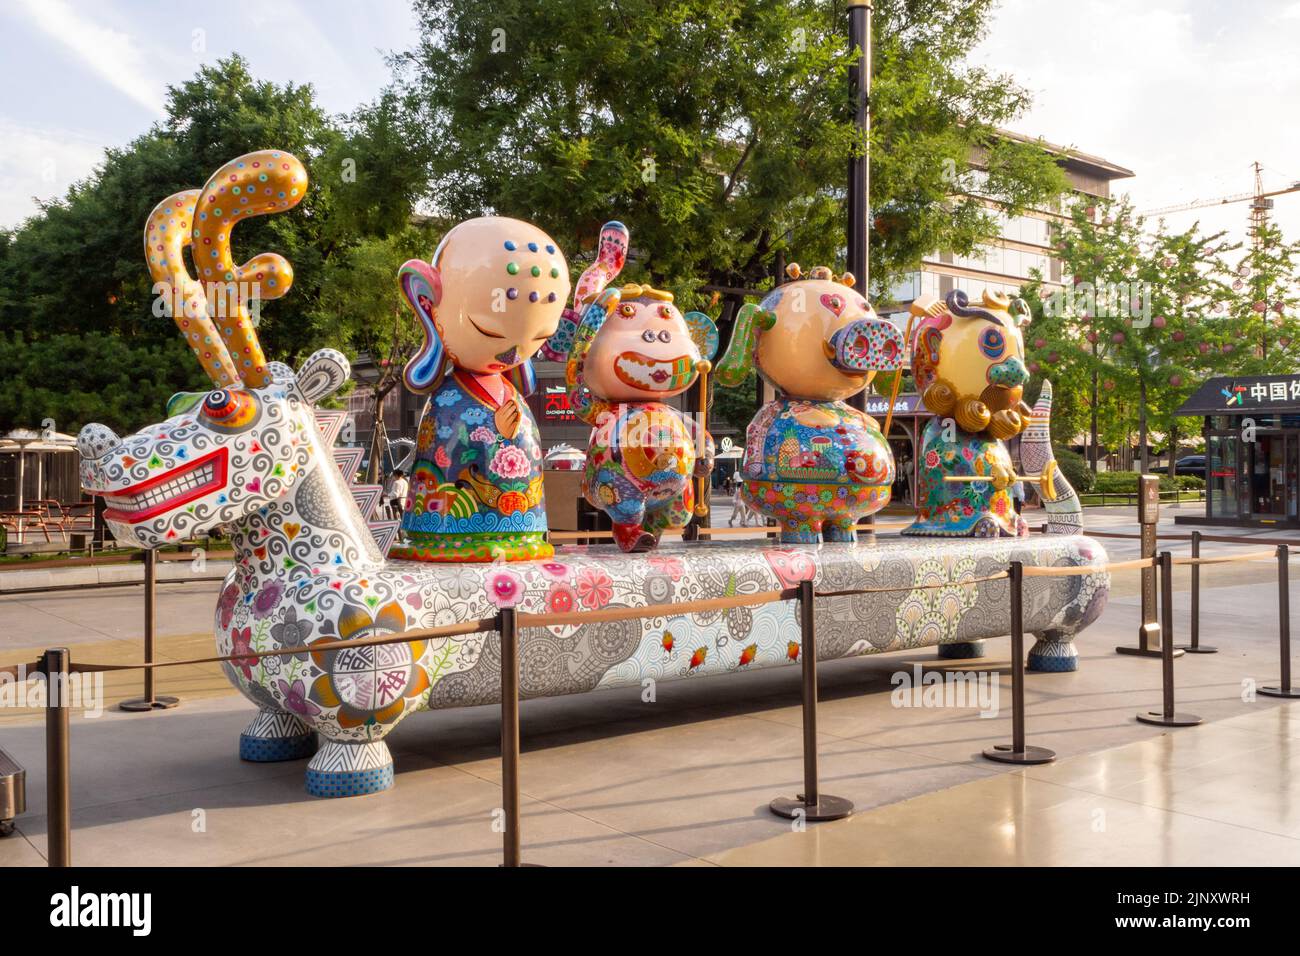 Xian, China, 2022,Traditional Chinese sculpture with a Christmas theme in a public plaza or town square. Stock Photo